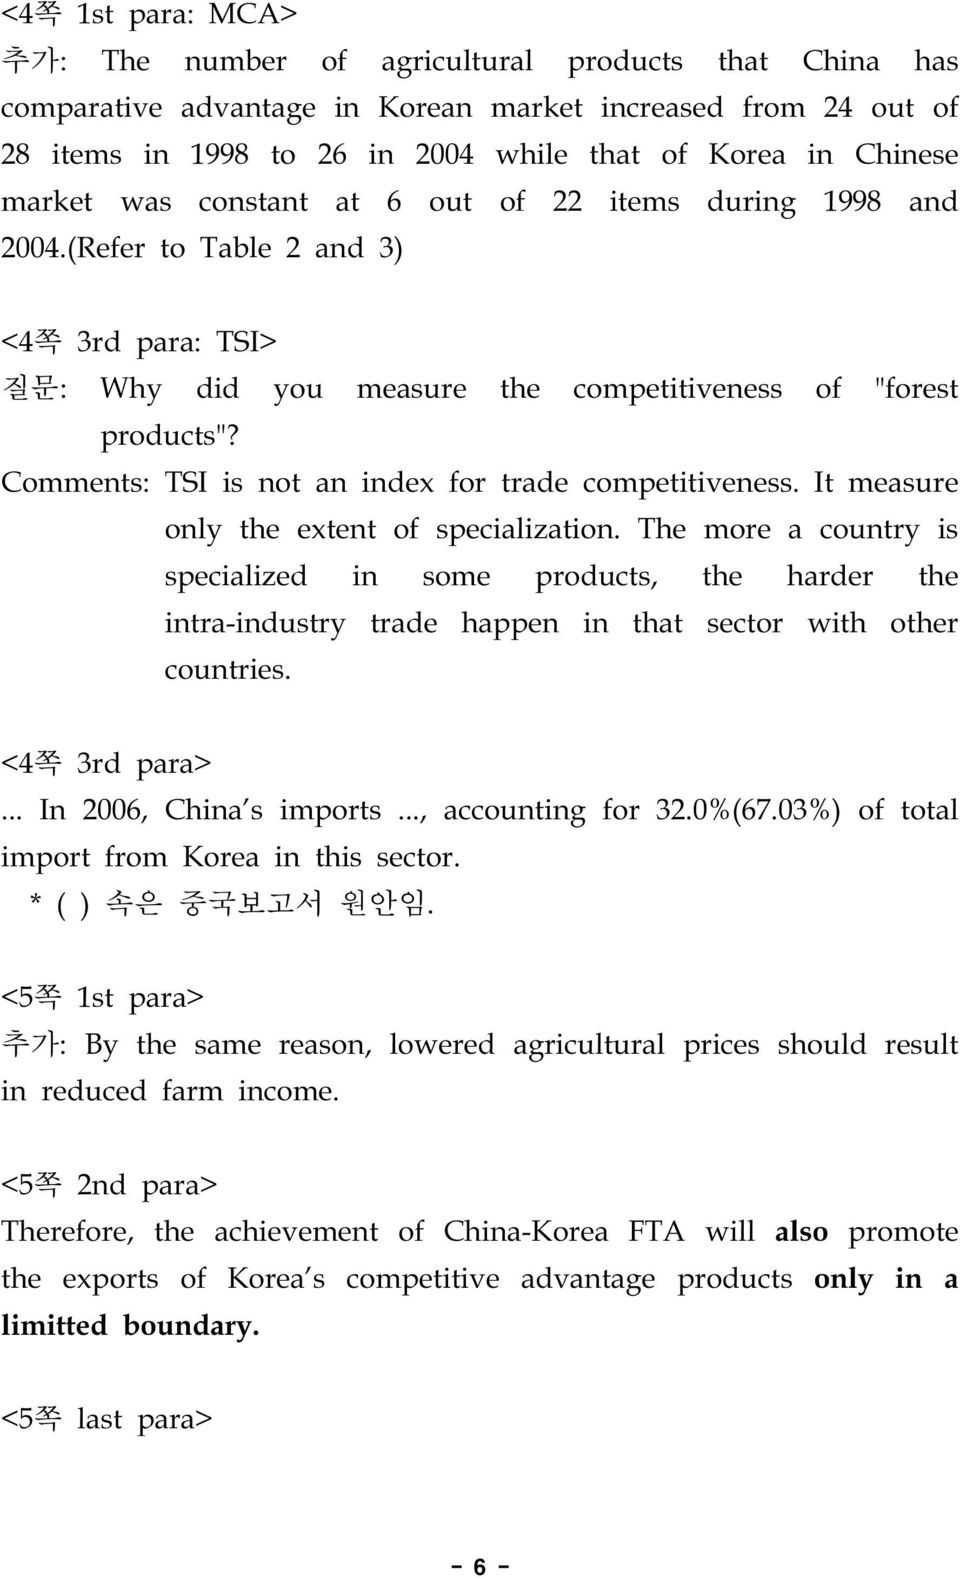 Comments: TSI is not an index for trade competitiveness. It measure only the extent of specialization.